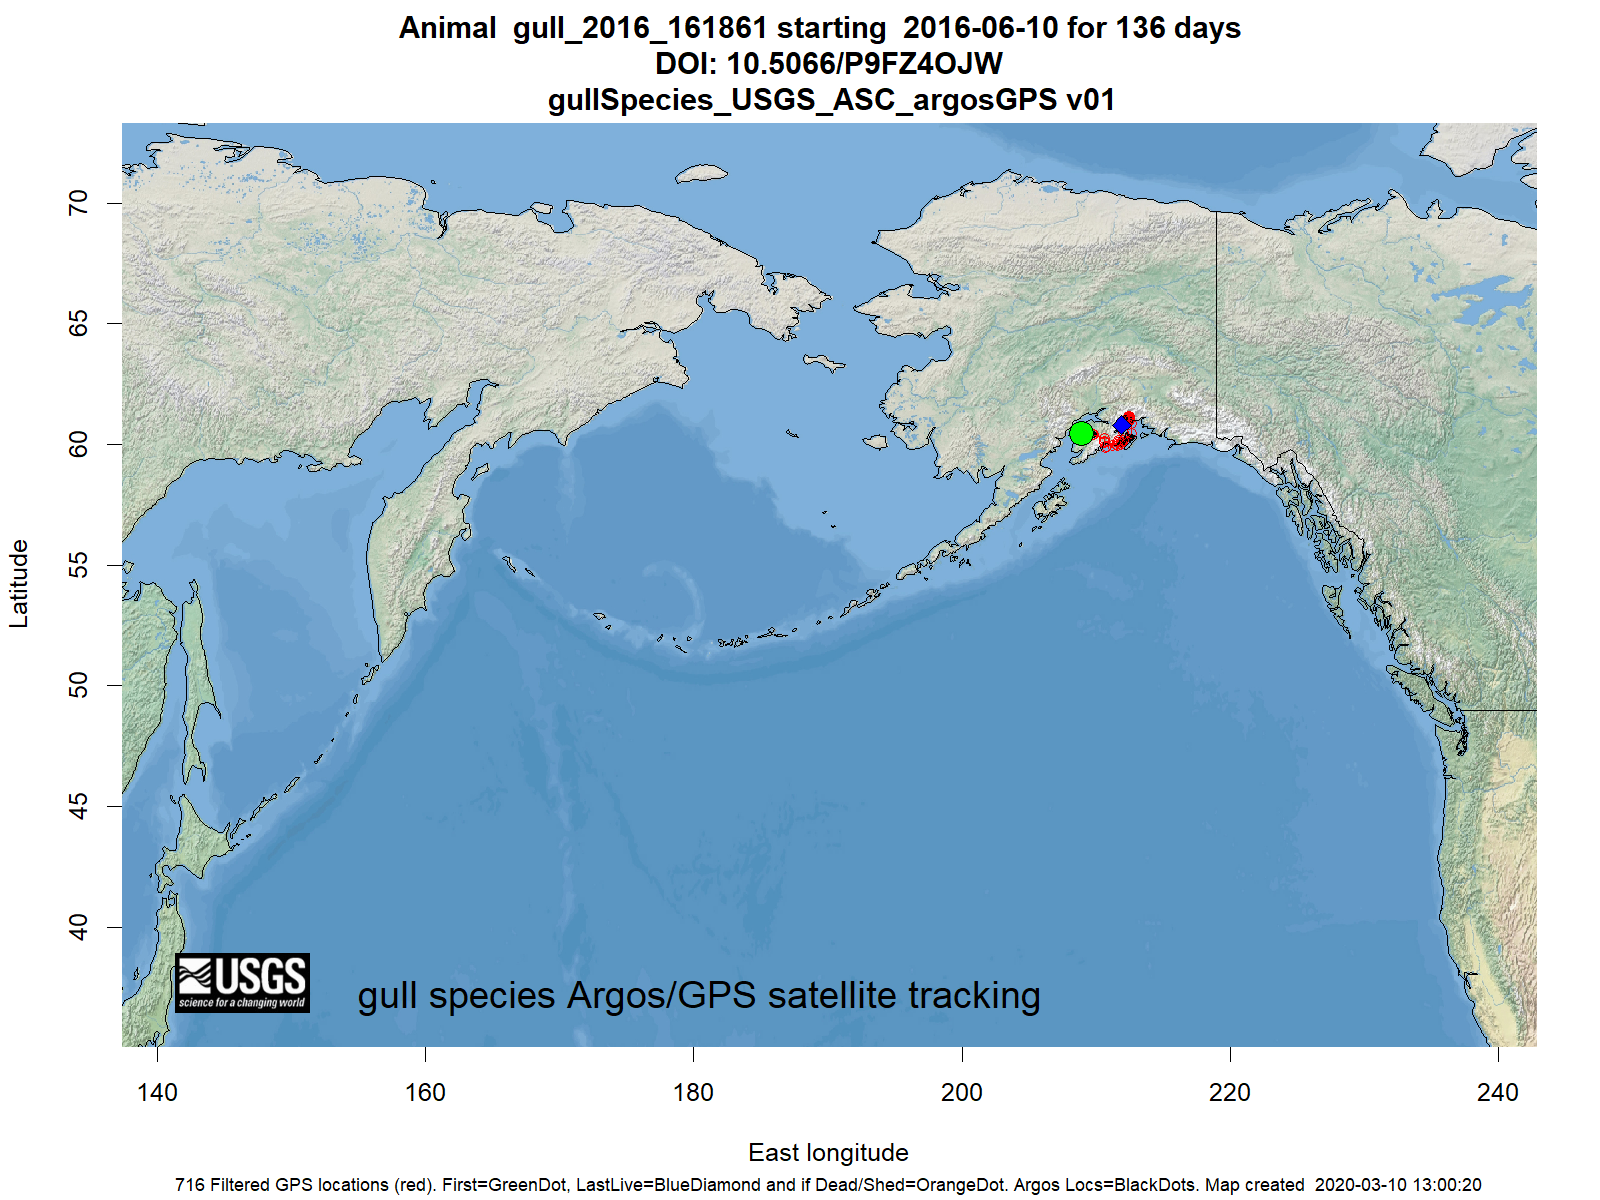 Tracking map for species gull_2016_161861